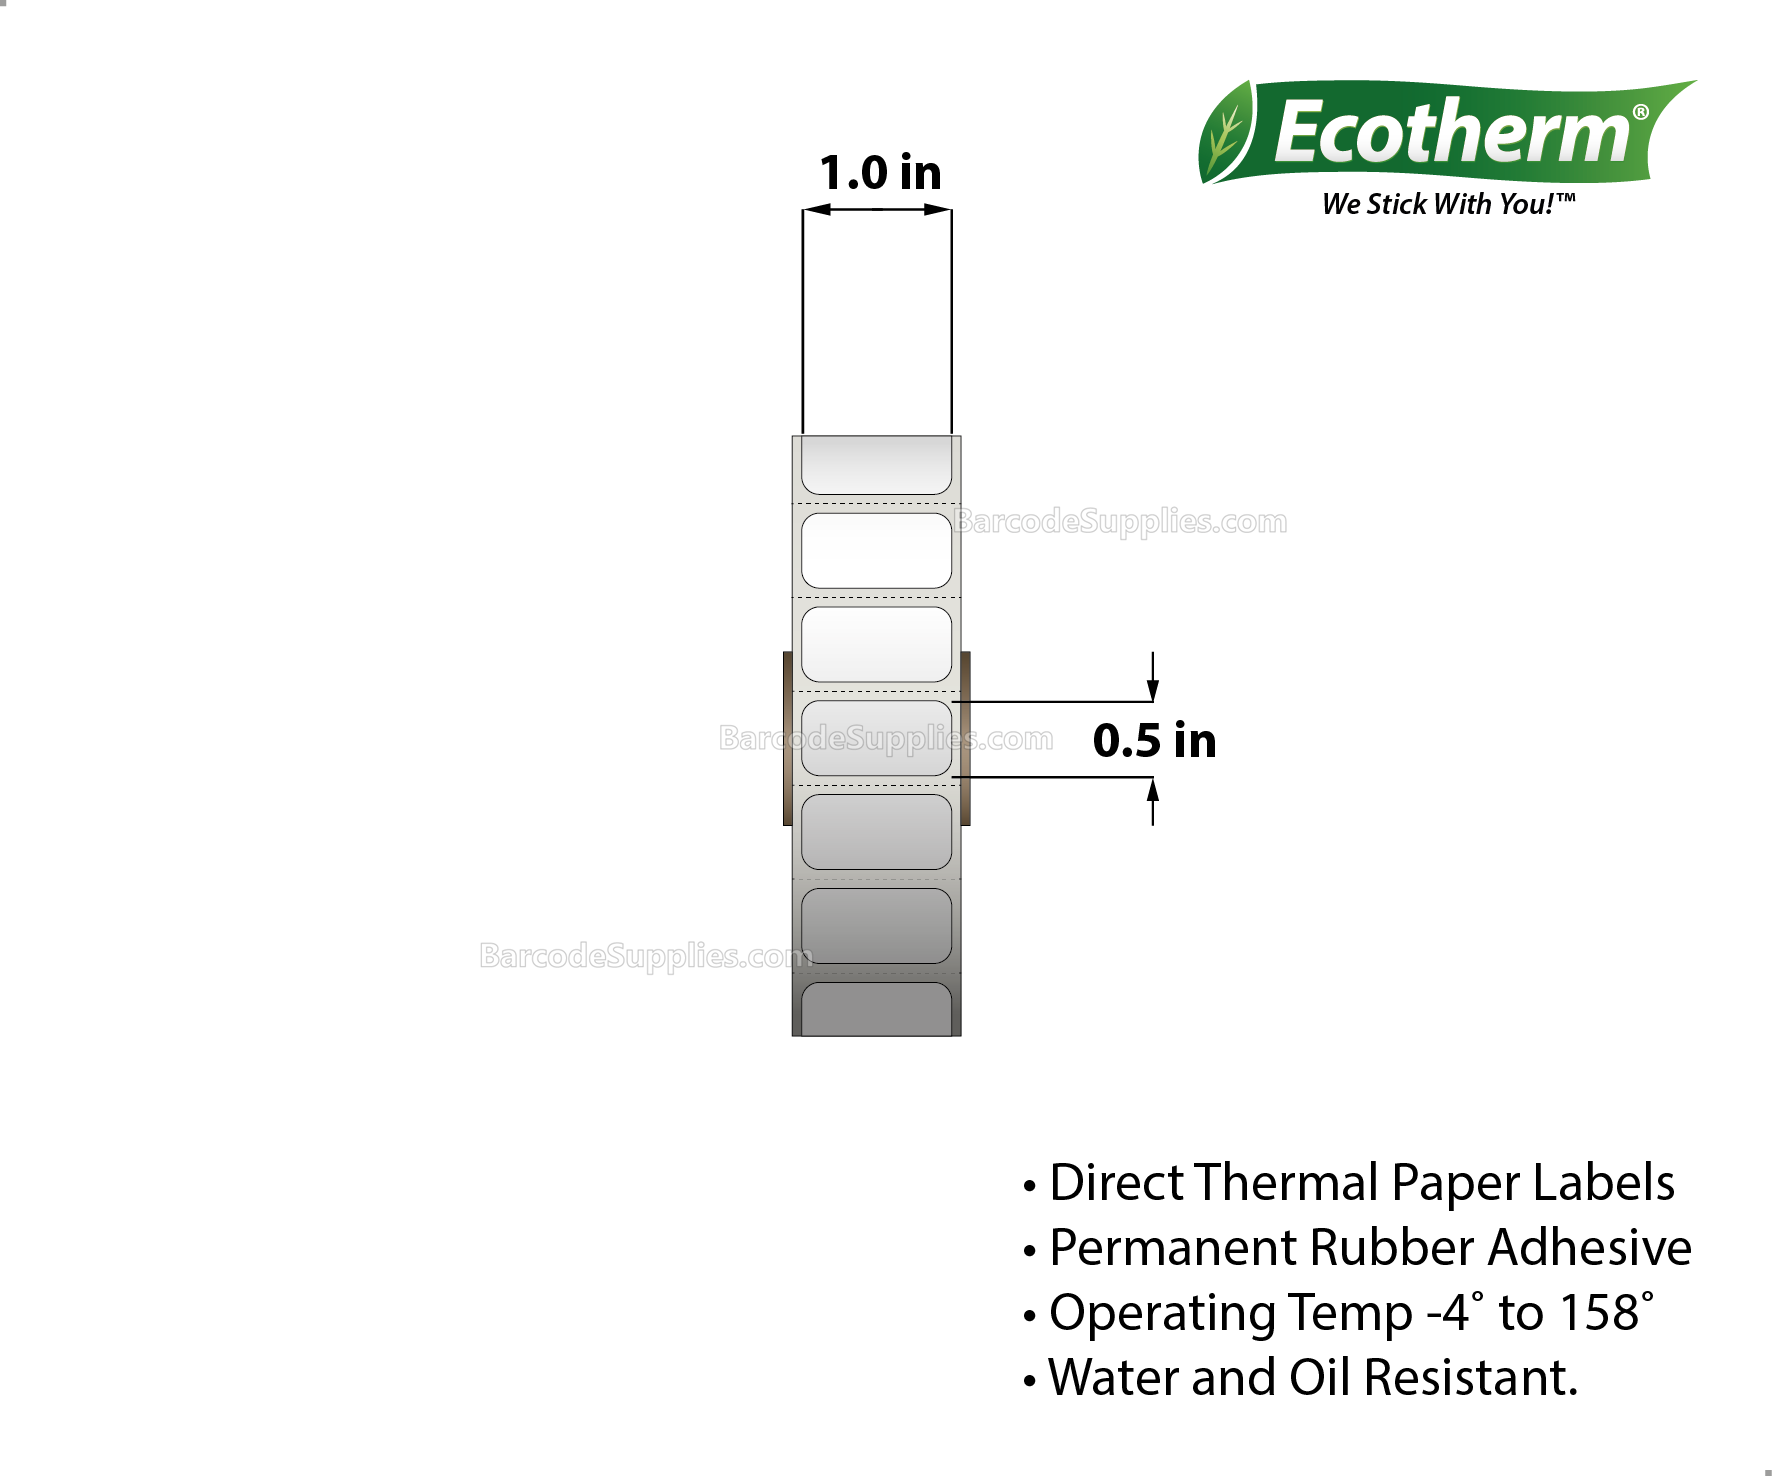 1 x 0.5 Direct Thermal White Labels With Rubber Adhesive - Perforated - 2450 Labels Per Roll - Carton Of 4 Rolls - 9800 Labels Total - MPN: ECOTHERM14118-4